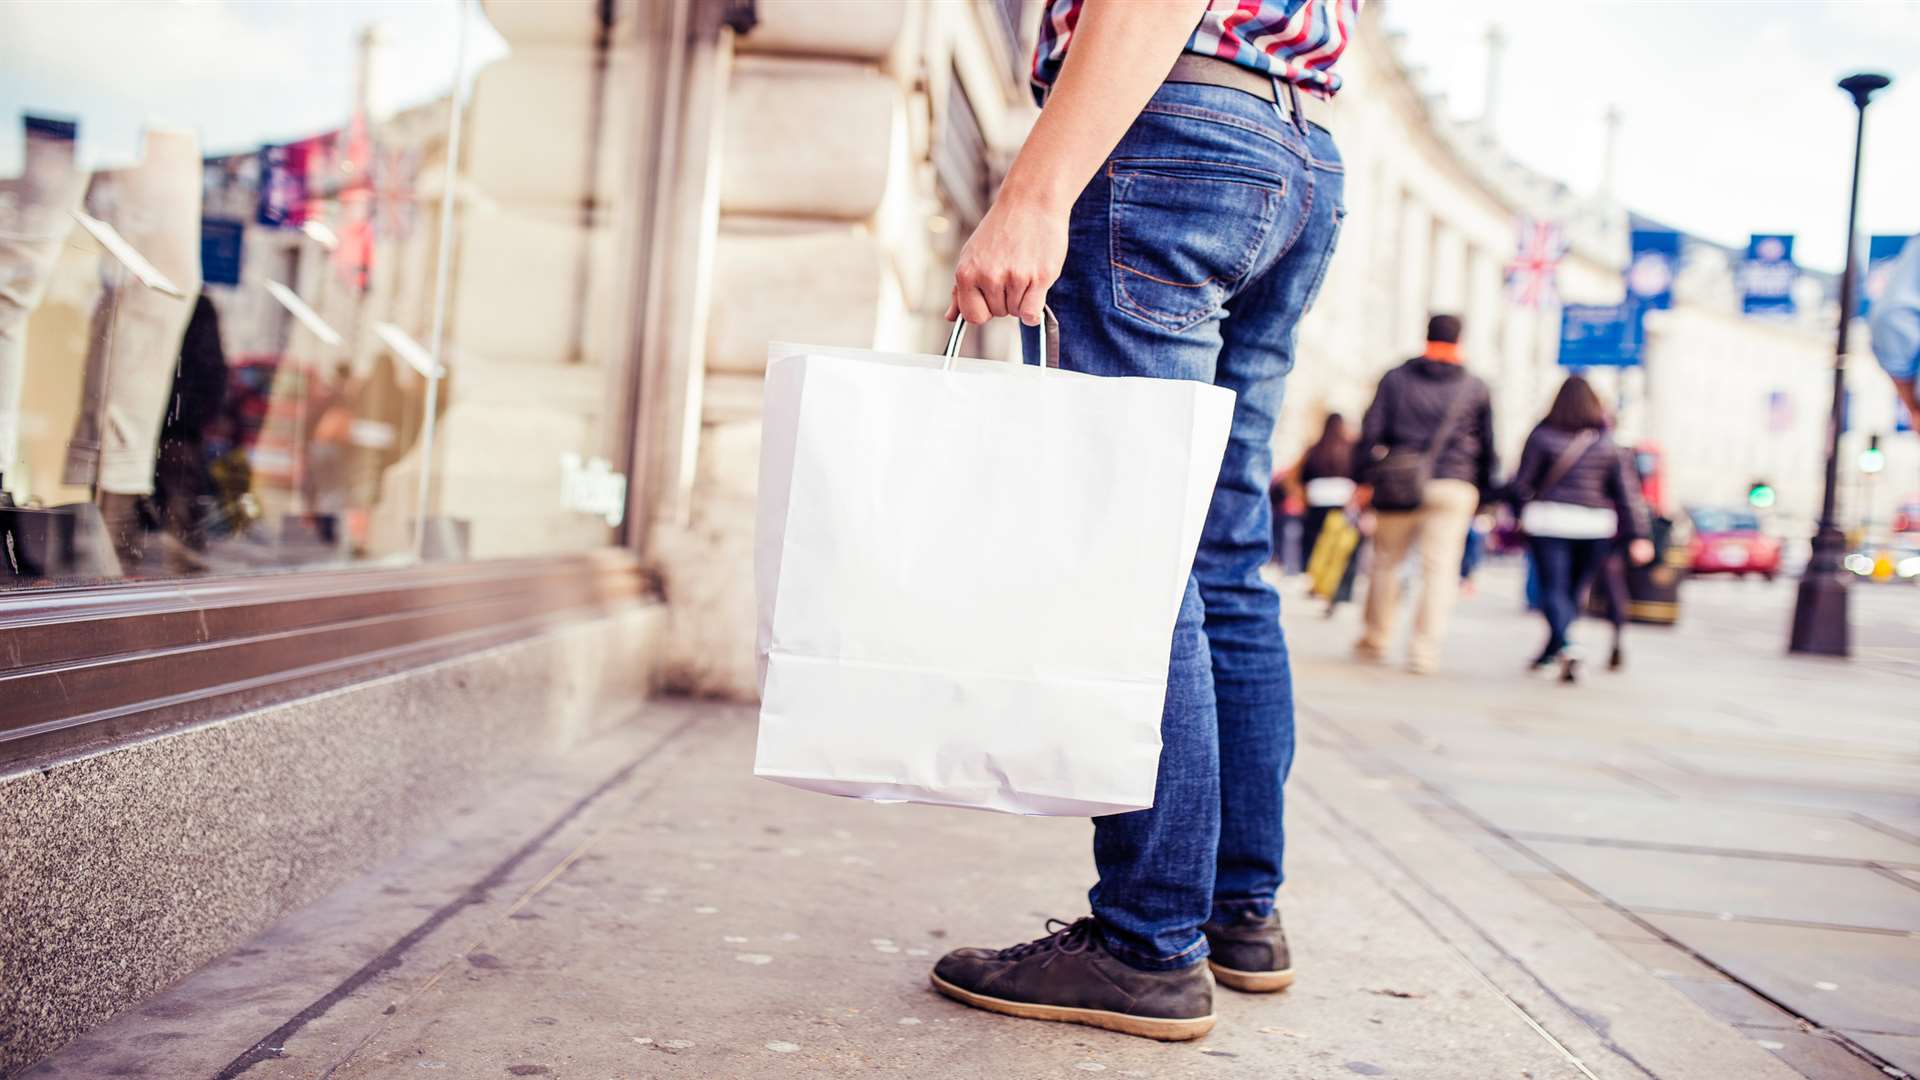 Councils are hoping it will encourage more people to hit the highstreet. Picture: GettyImages